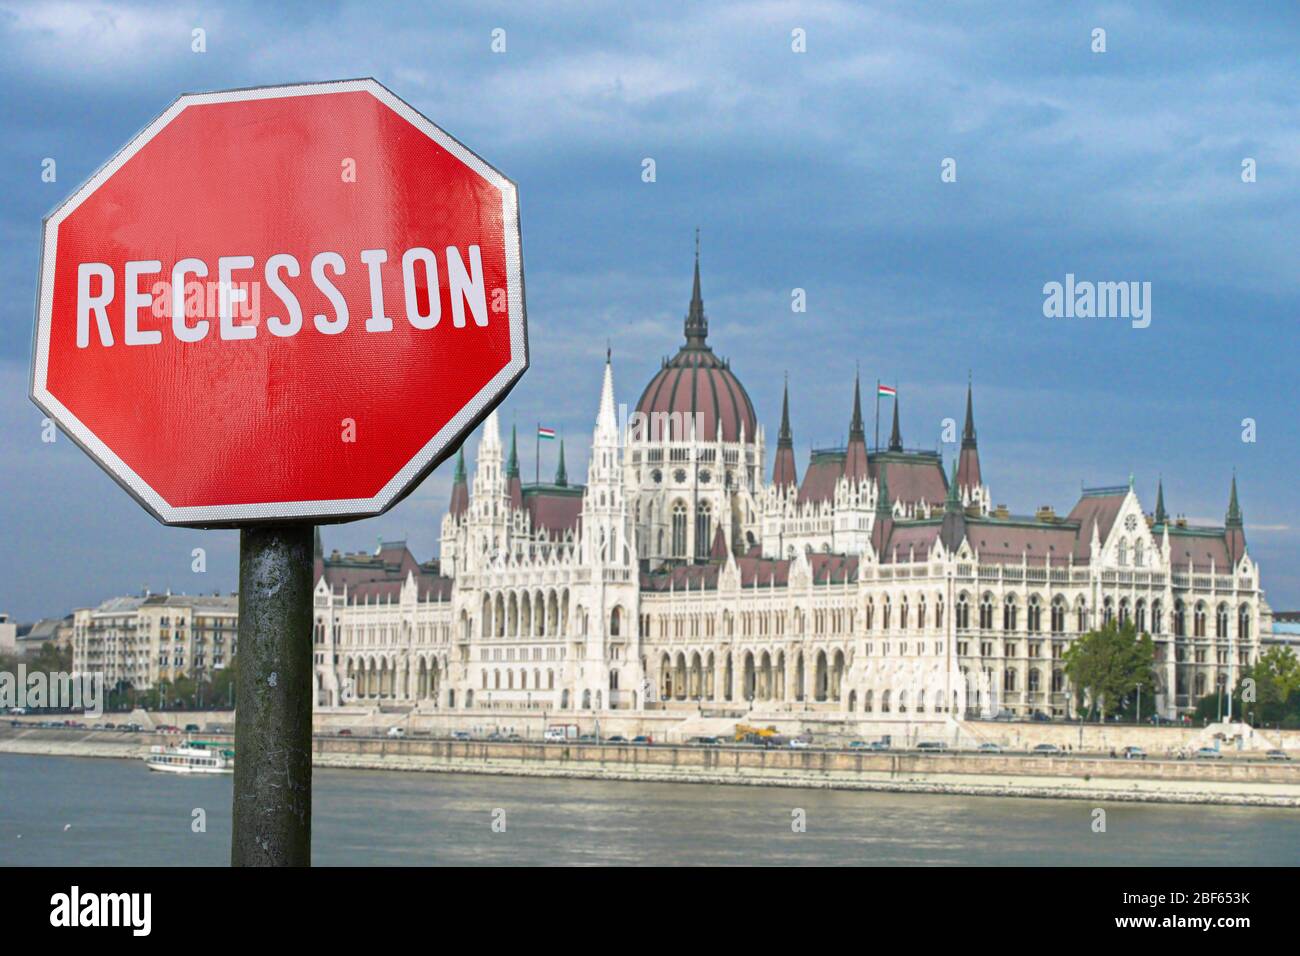 Recession stop sign with view of parliament in Budapest, Hungary. Financial crash in world economy because of coronavirus pandemic. Stock Photo